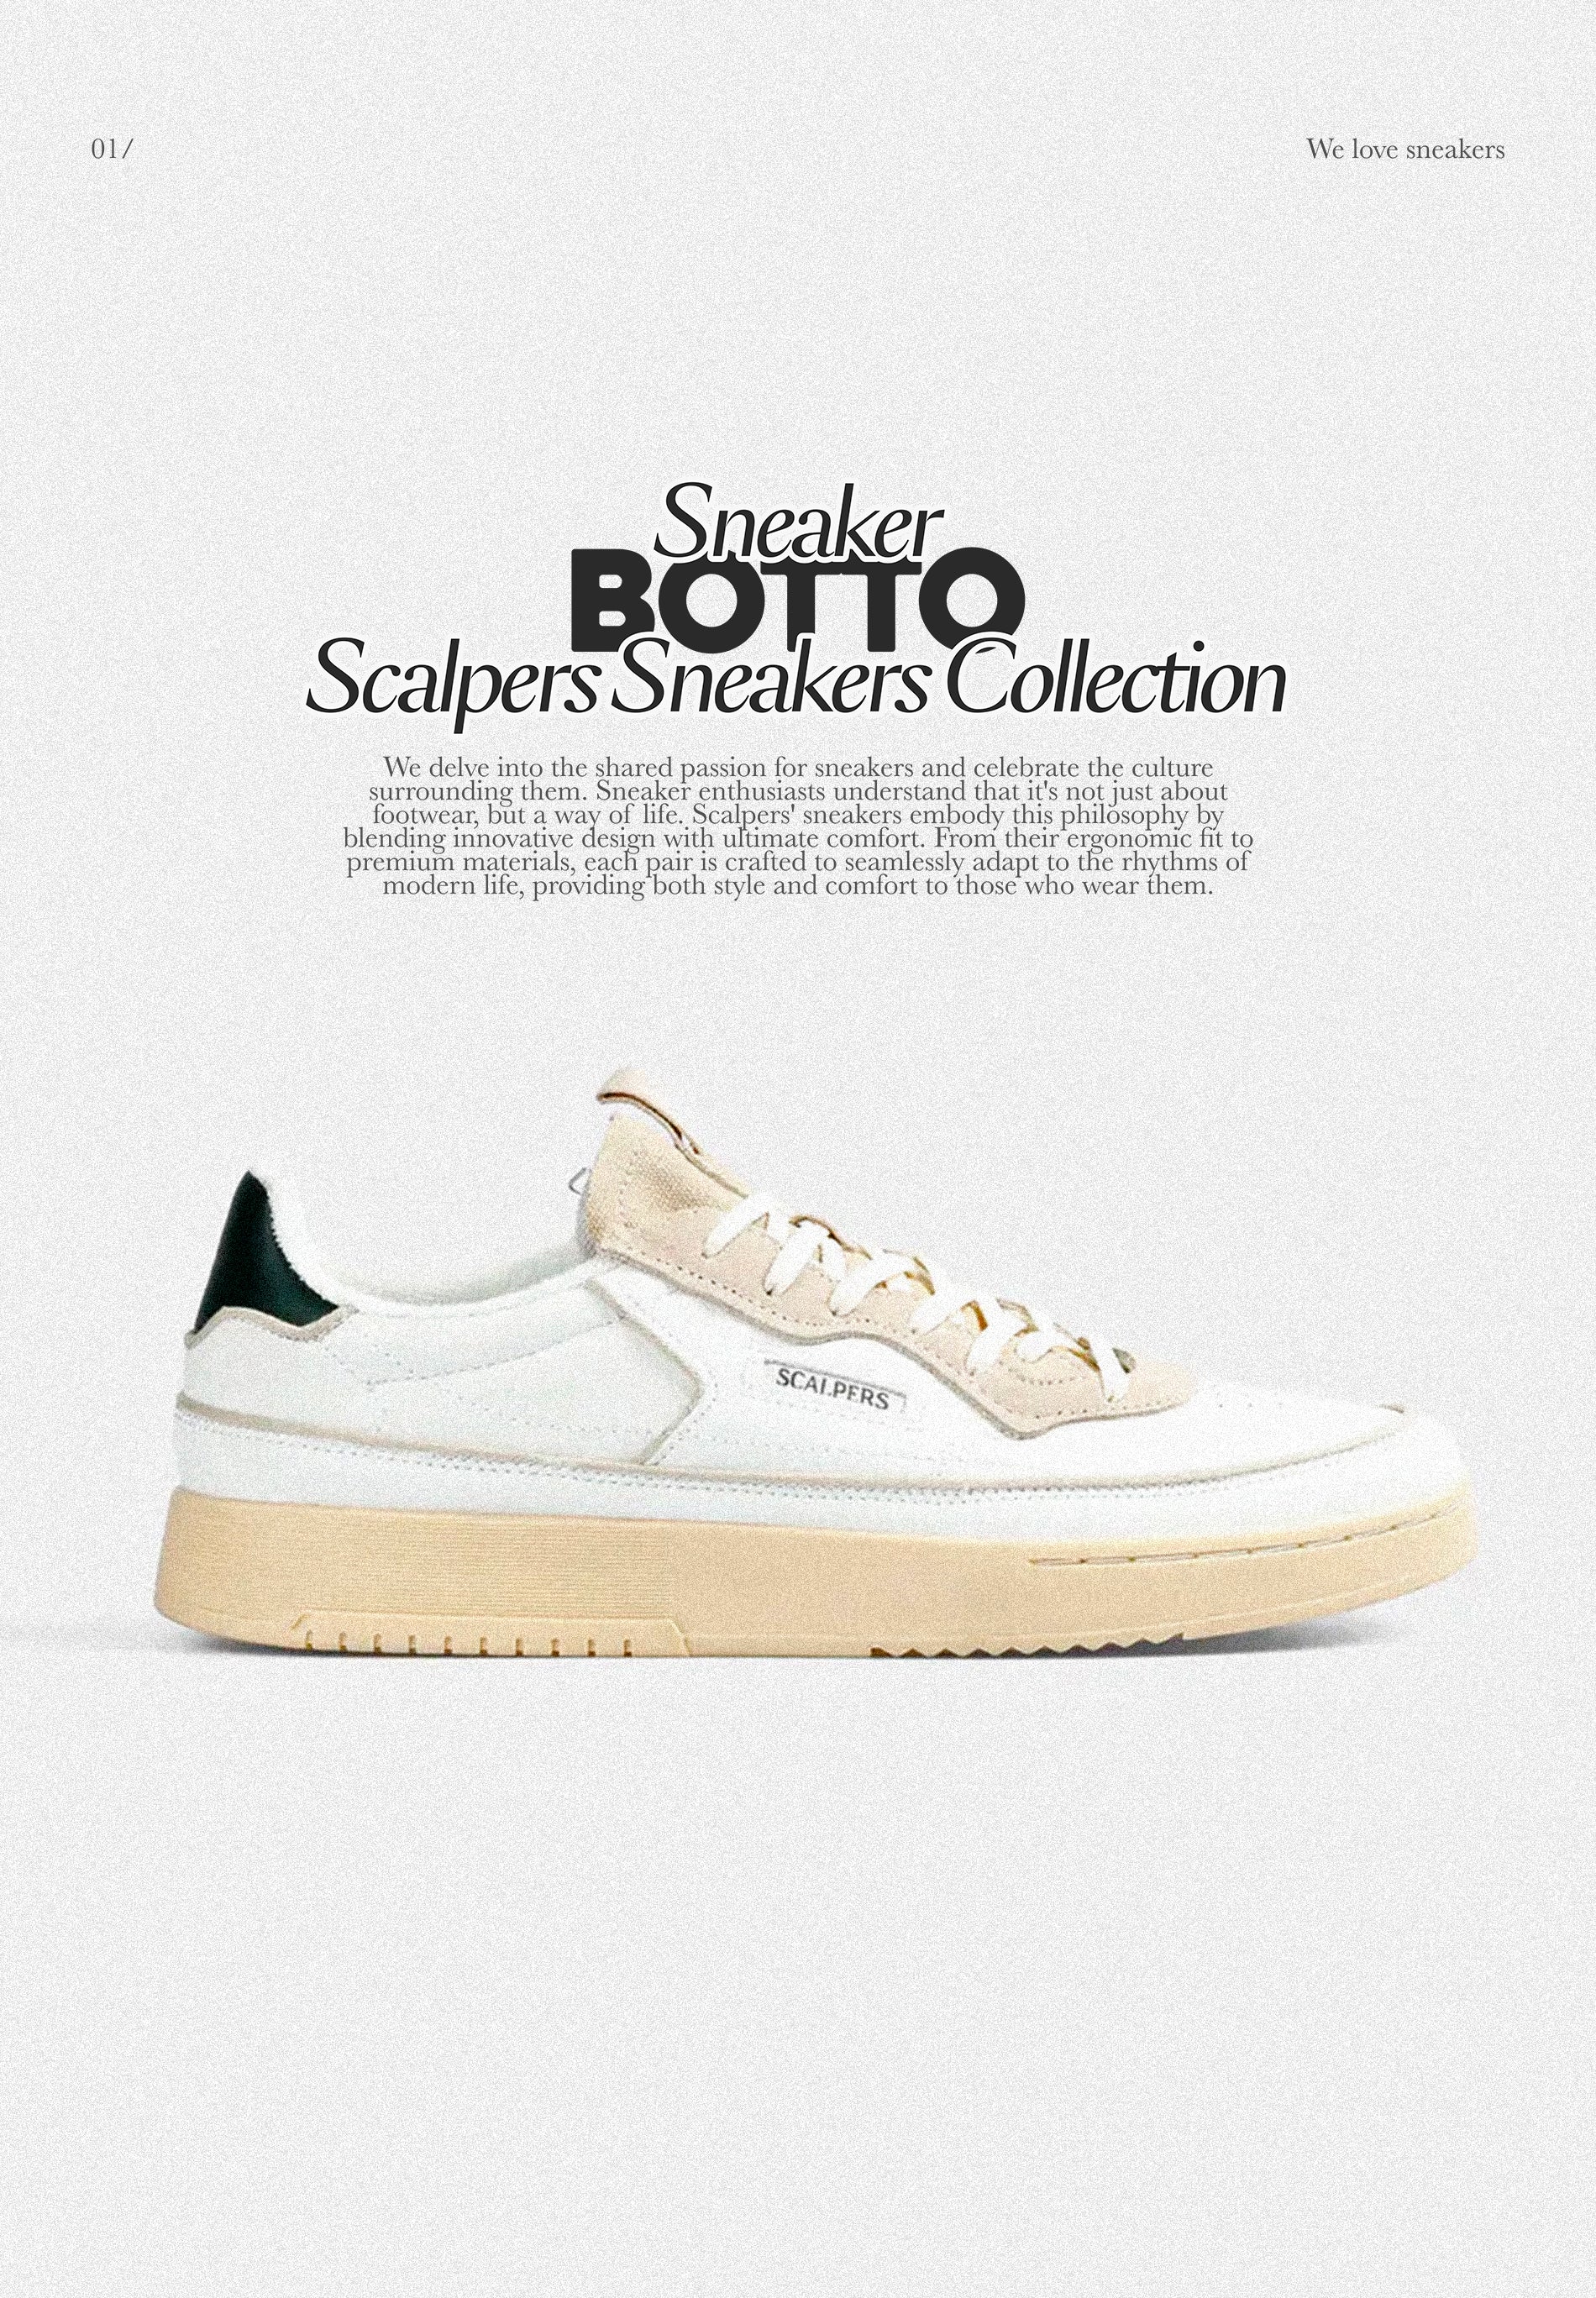 BOTTO SNEAKERS